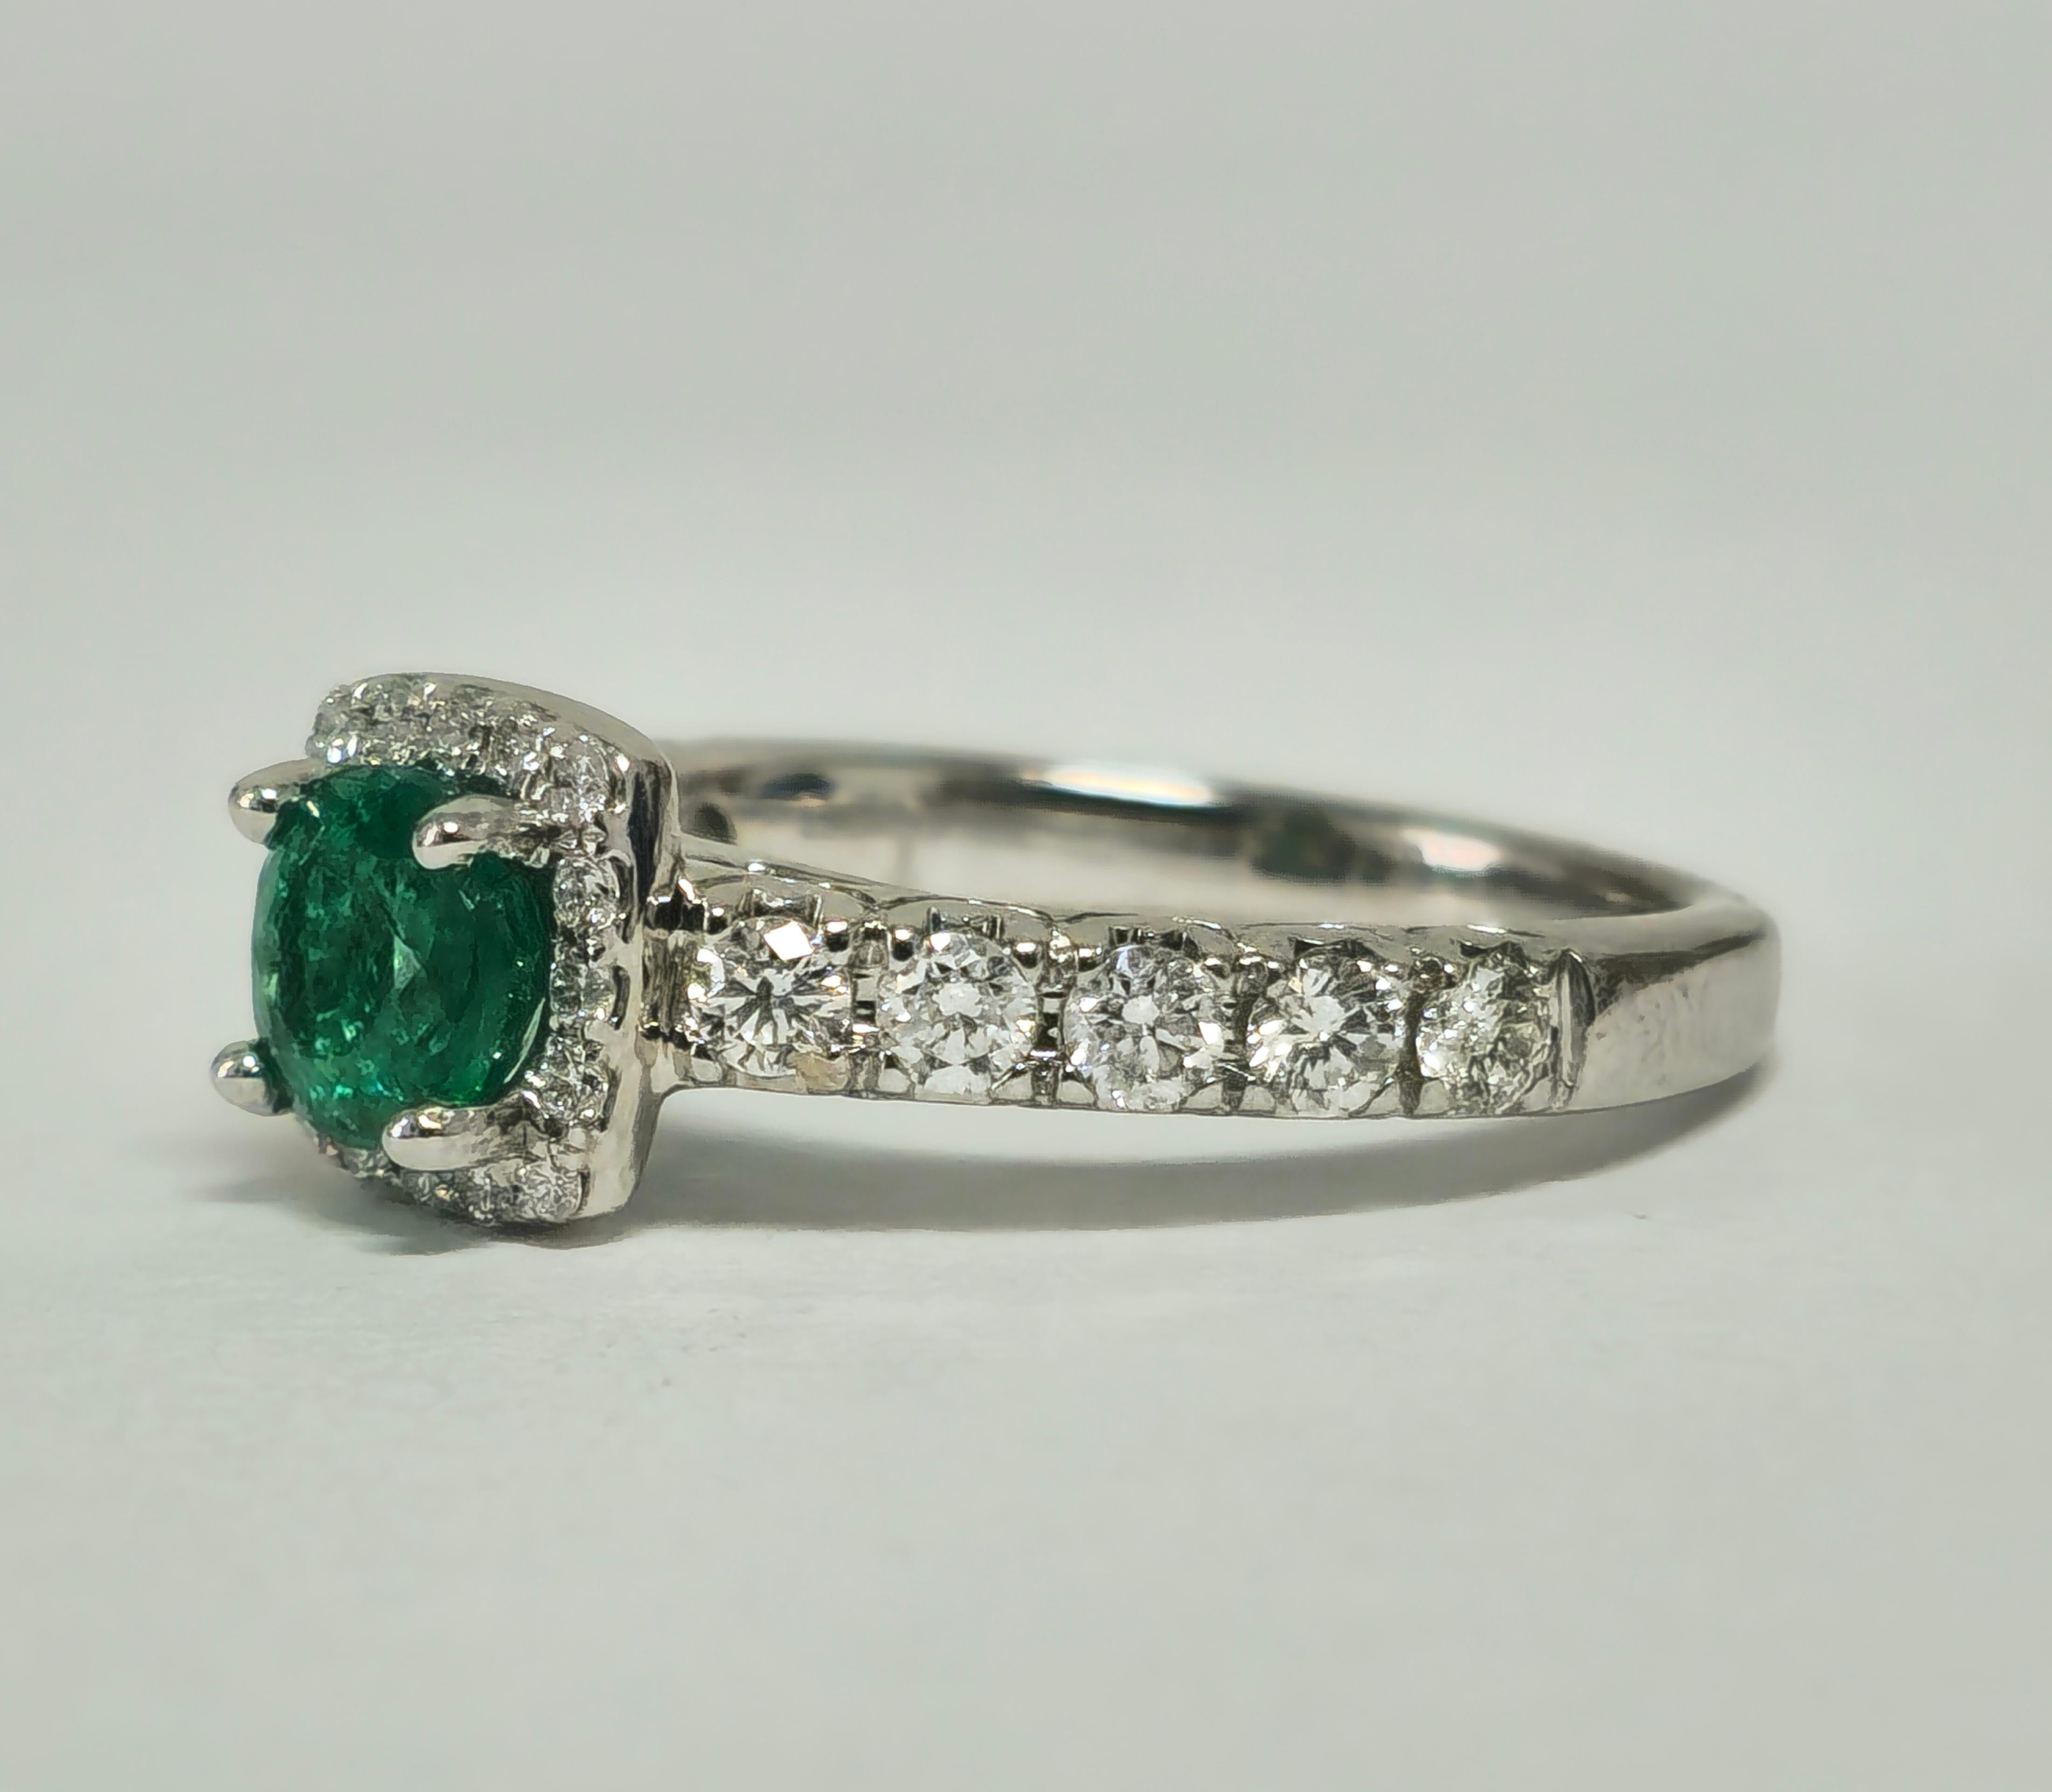 Step into elegance with our 14K white gold Emerald and Diamond Cocktail Ring, boasting a captivating 0.60 carat Colombian emerald and 0.95 carats of dazzling side diamonds. Perfect for weddings, engagements, and special events, this exquisite ring